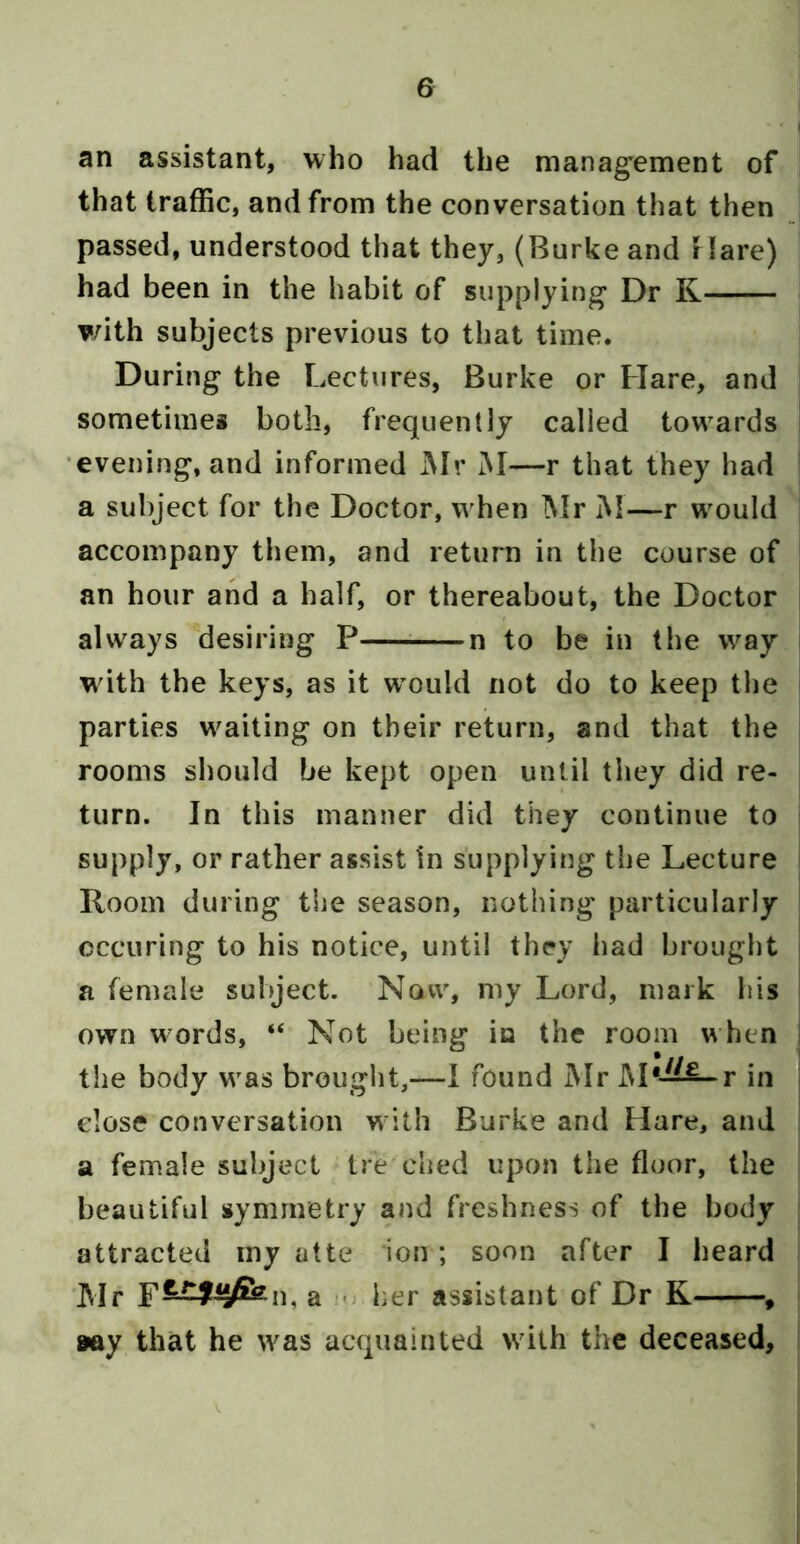 an assistant, who had the manag^ement of that traffic, and from the conversation that then passed, understood that they, (Burke and Hare) had been in the habit of supplying Dr K with subjects previous to that time. During the Lectures, Burke or Hare, and sometimes both, frequently called towards •evening, and informed Mr M—r that they had a subject for the Doctor, when ]\Ir M—r would accompany them, and return in the course of an hour and a half, or thereabout, the Doctor always desiring P n to be in the way wdth the keys, as it w'ould not do to keep the parties waiting on their return, and that the rooms should be kept open until they did re- turn. In this manner did they continue to supply, or rather assist in supplying the Lecture Kooin during the season, nothing particularly cccuring to his notice, until they liad brought a female subject. Now, my Lord, mark his own w ords, “ Not being in the room w hen the body was brought,—1 found Mr M*-^^^r in dose conversation with Burke and Hare, and a female subject tredied upon the floor, the beautiful symmetry and freshness of the body attracted iny atte ion; soon after I beard Mr F—y^^n, a - her assistant of Dr K , 9ay that he was acquainted >vith the deceased.